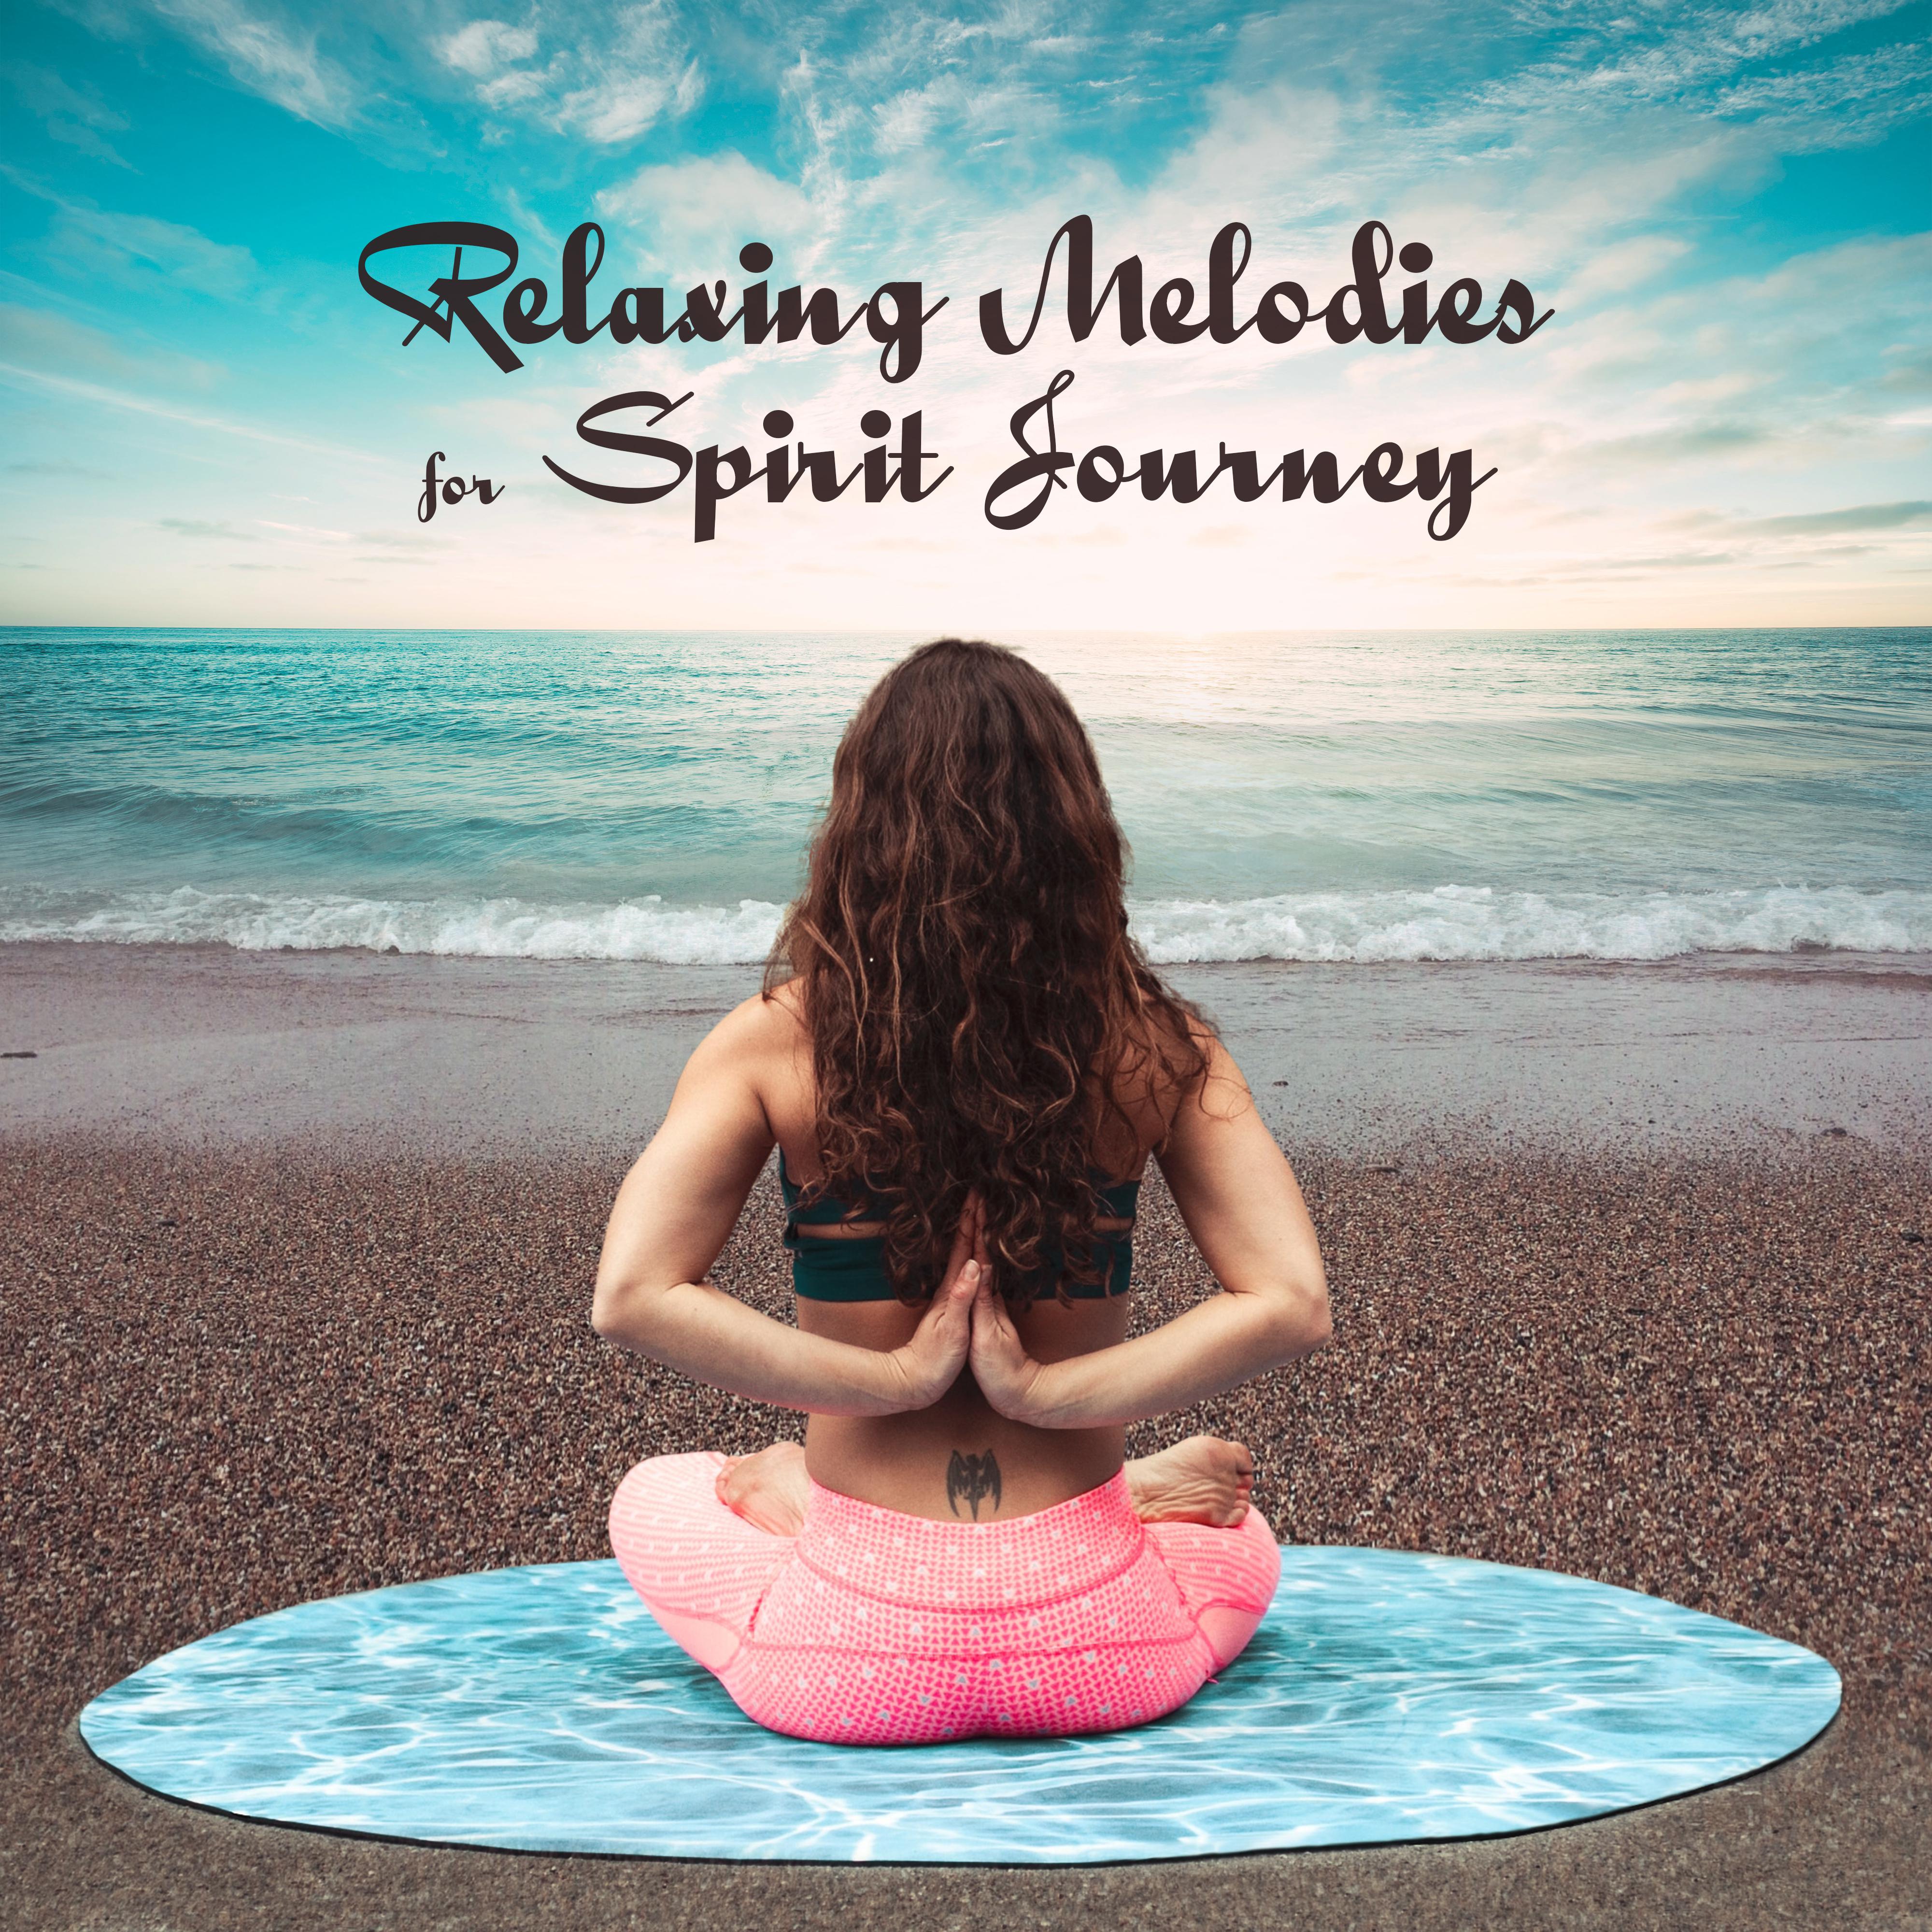 Relaxing Melodies for Spirit Journey